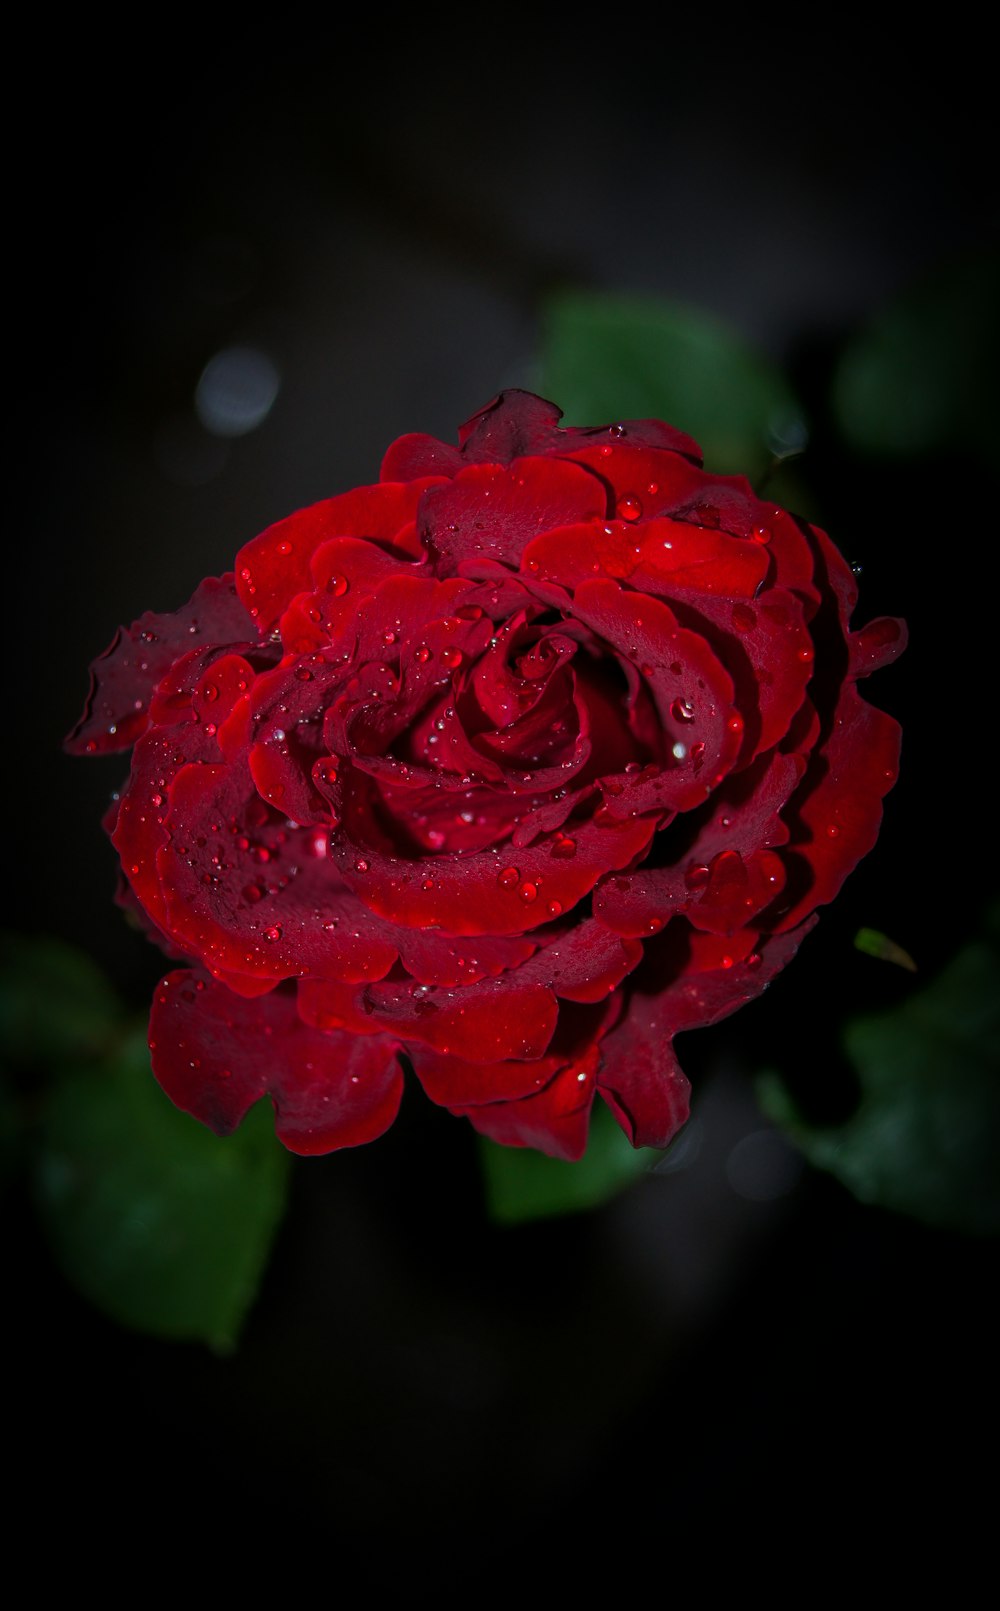 red rose in bloom in close up photography